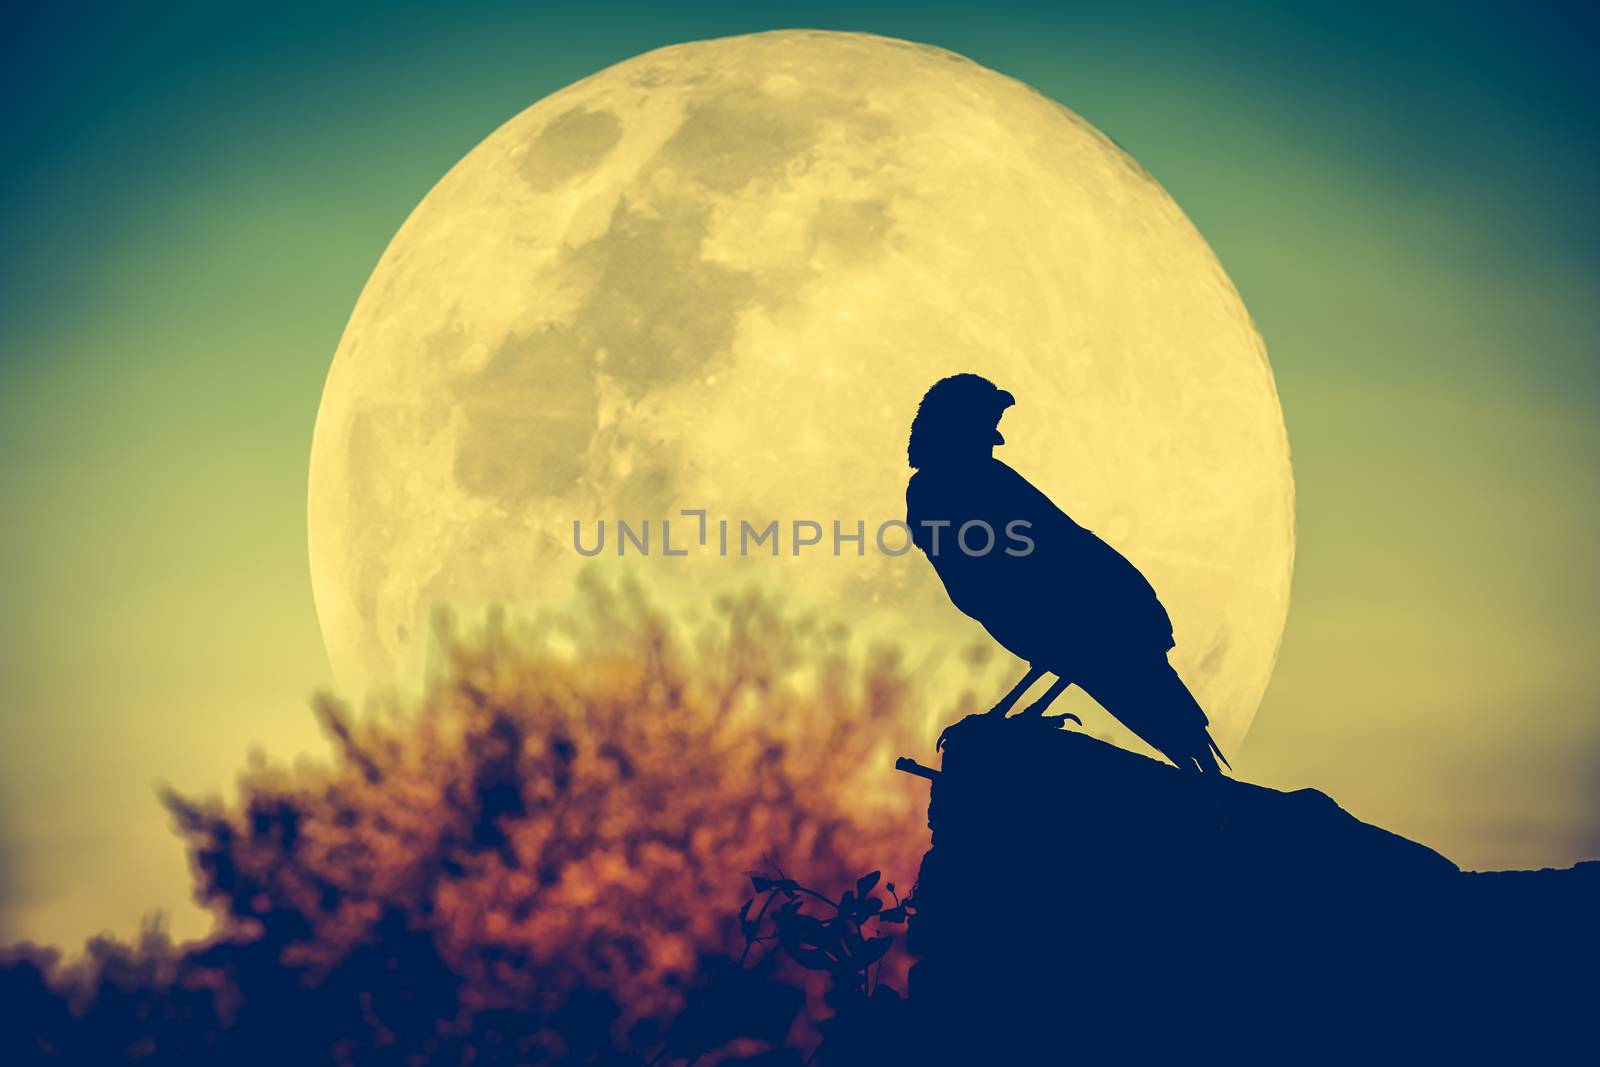 Beautiful night sky with full moon, tree and silhouette of crow on stone that can be used for halloween. Vignette and vintage picture style. Outdoors.